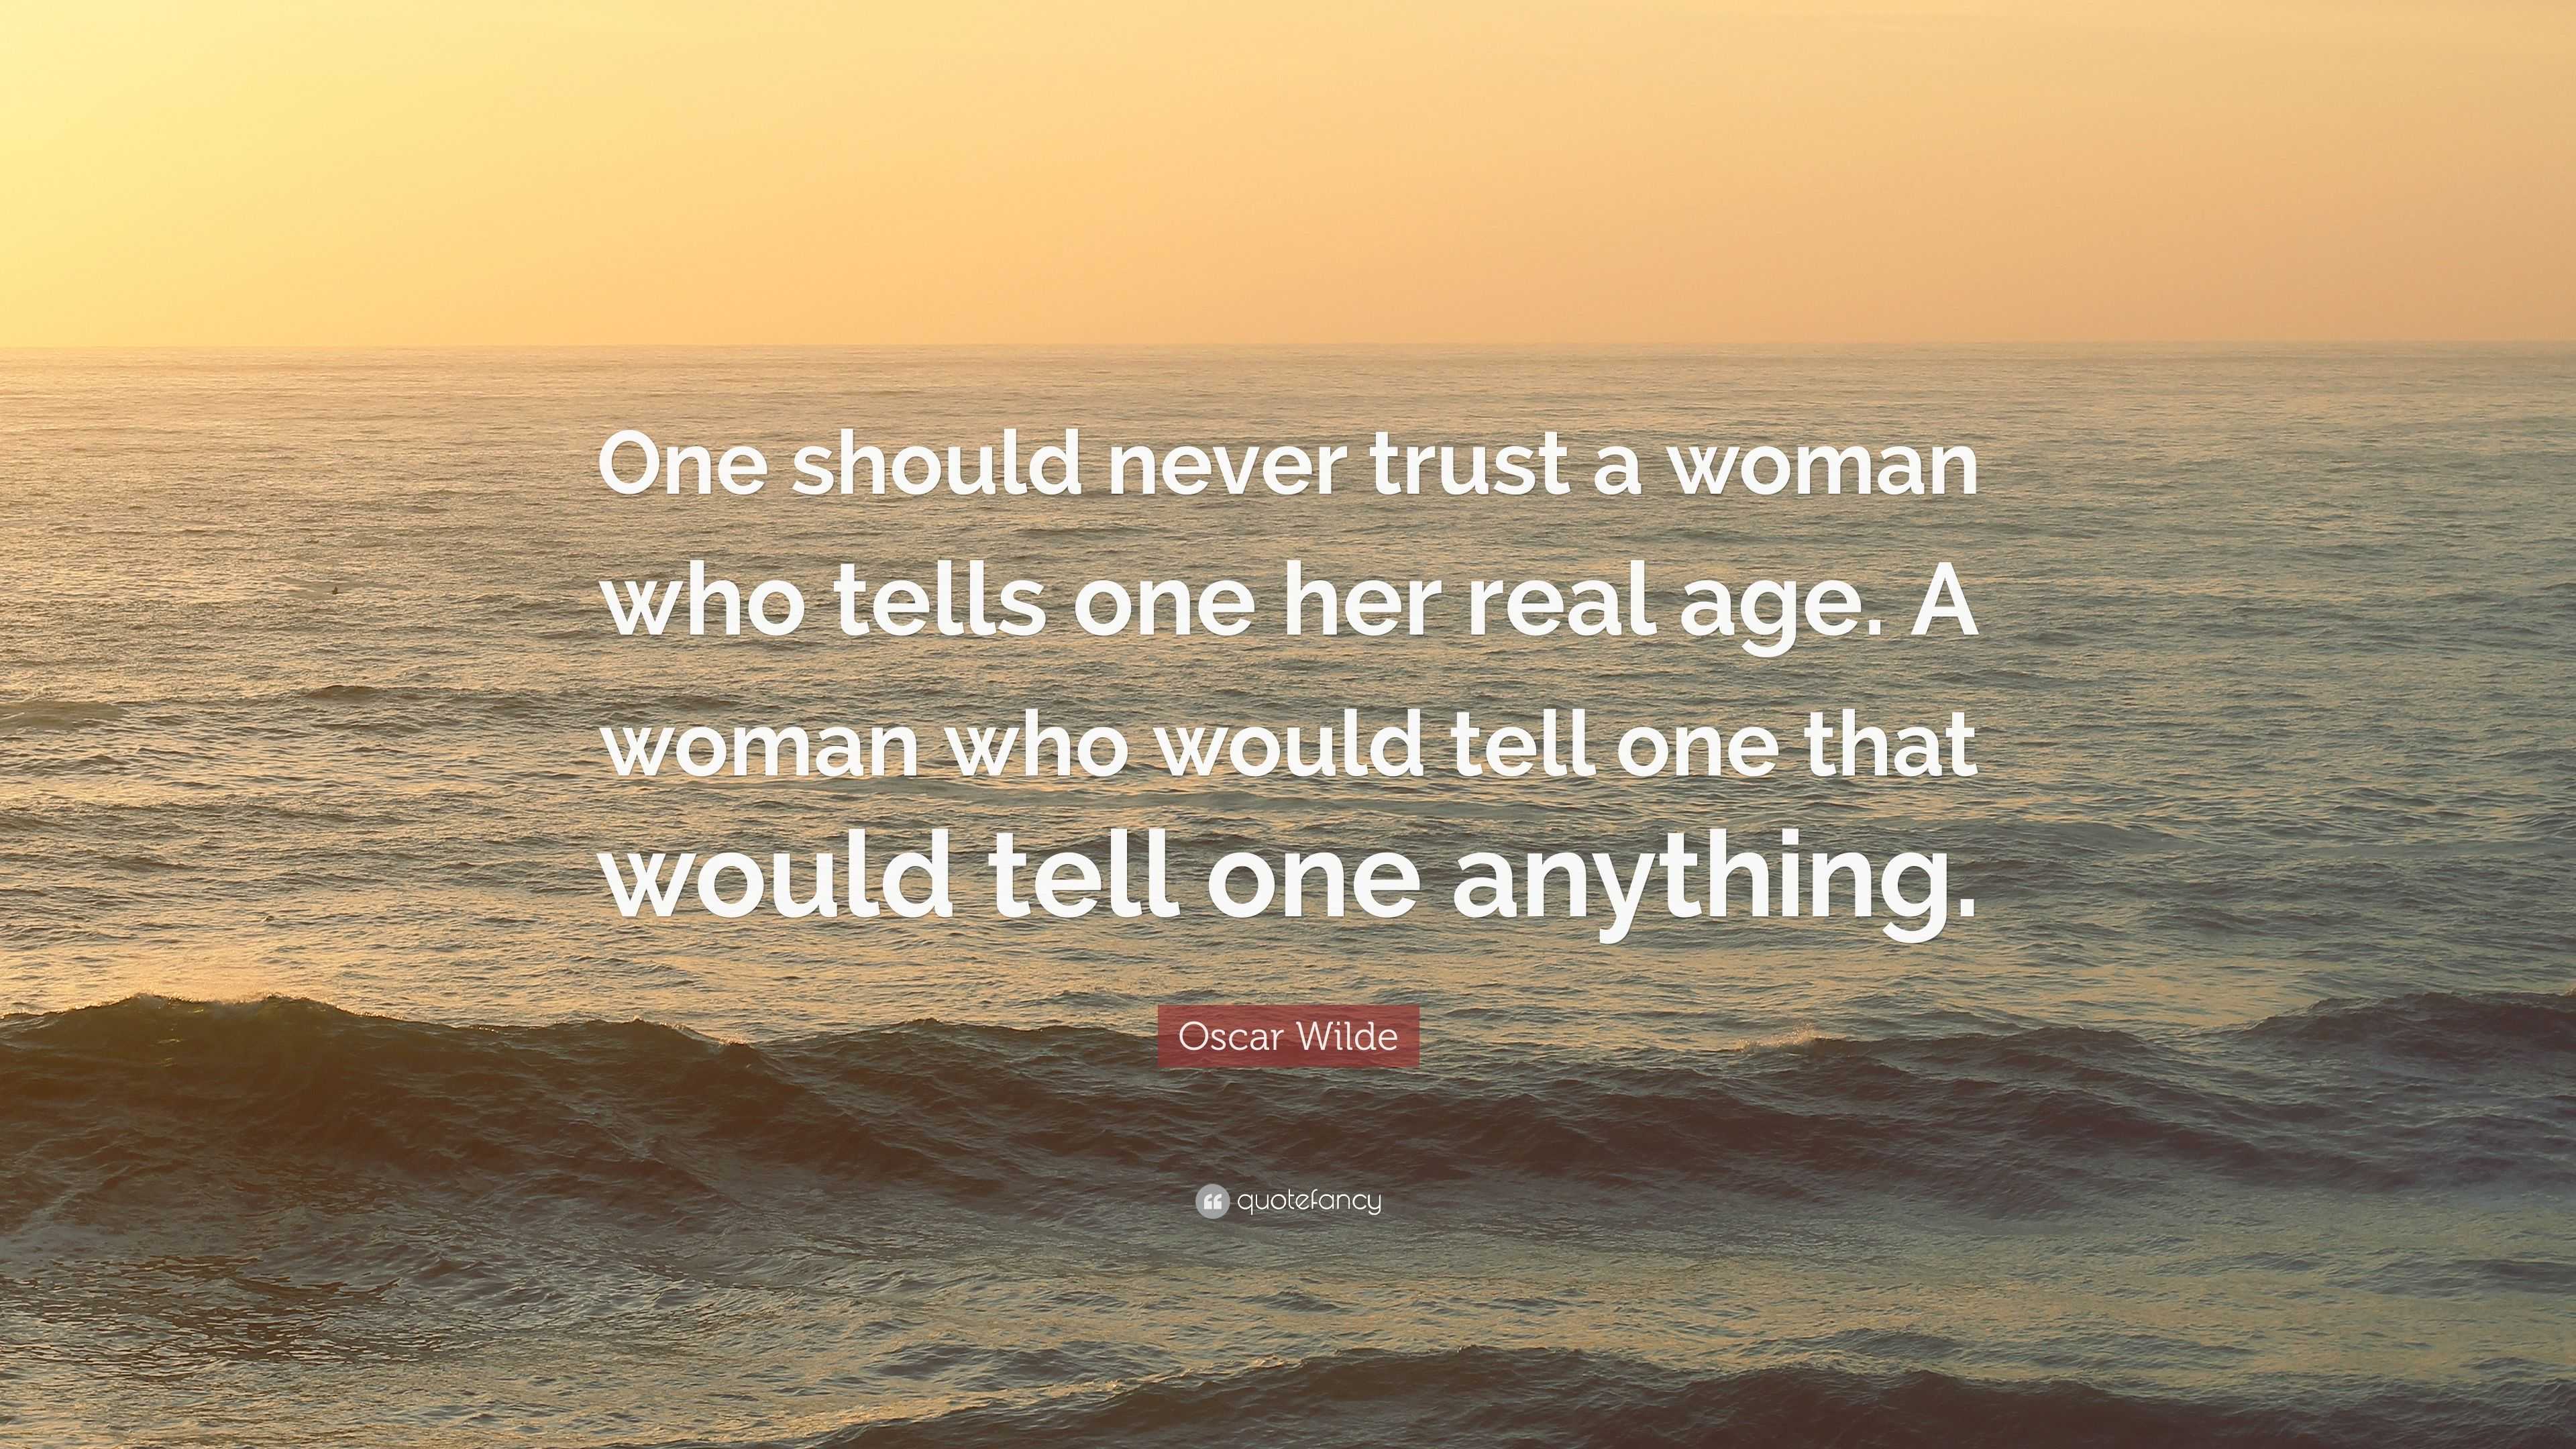 Oscar Wilde Quote: “One should never trust a woman who tells one her ...